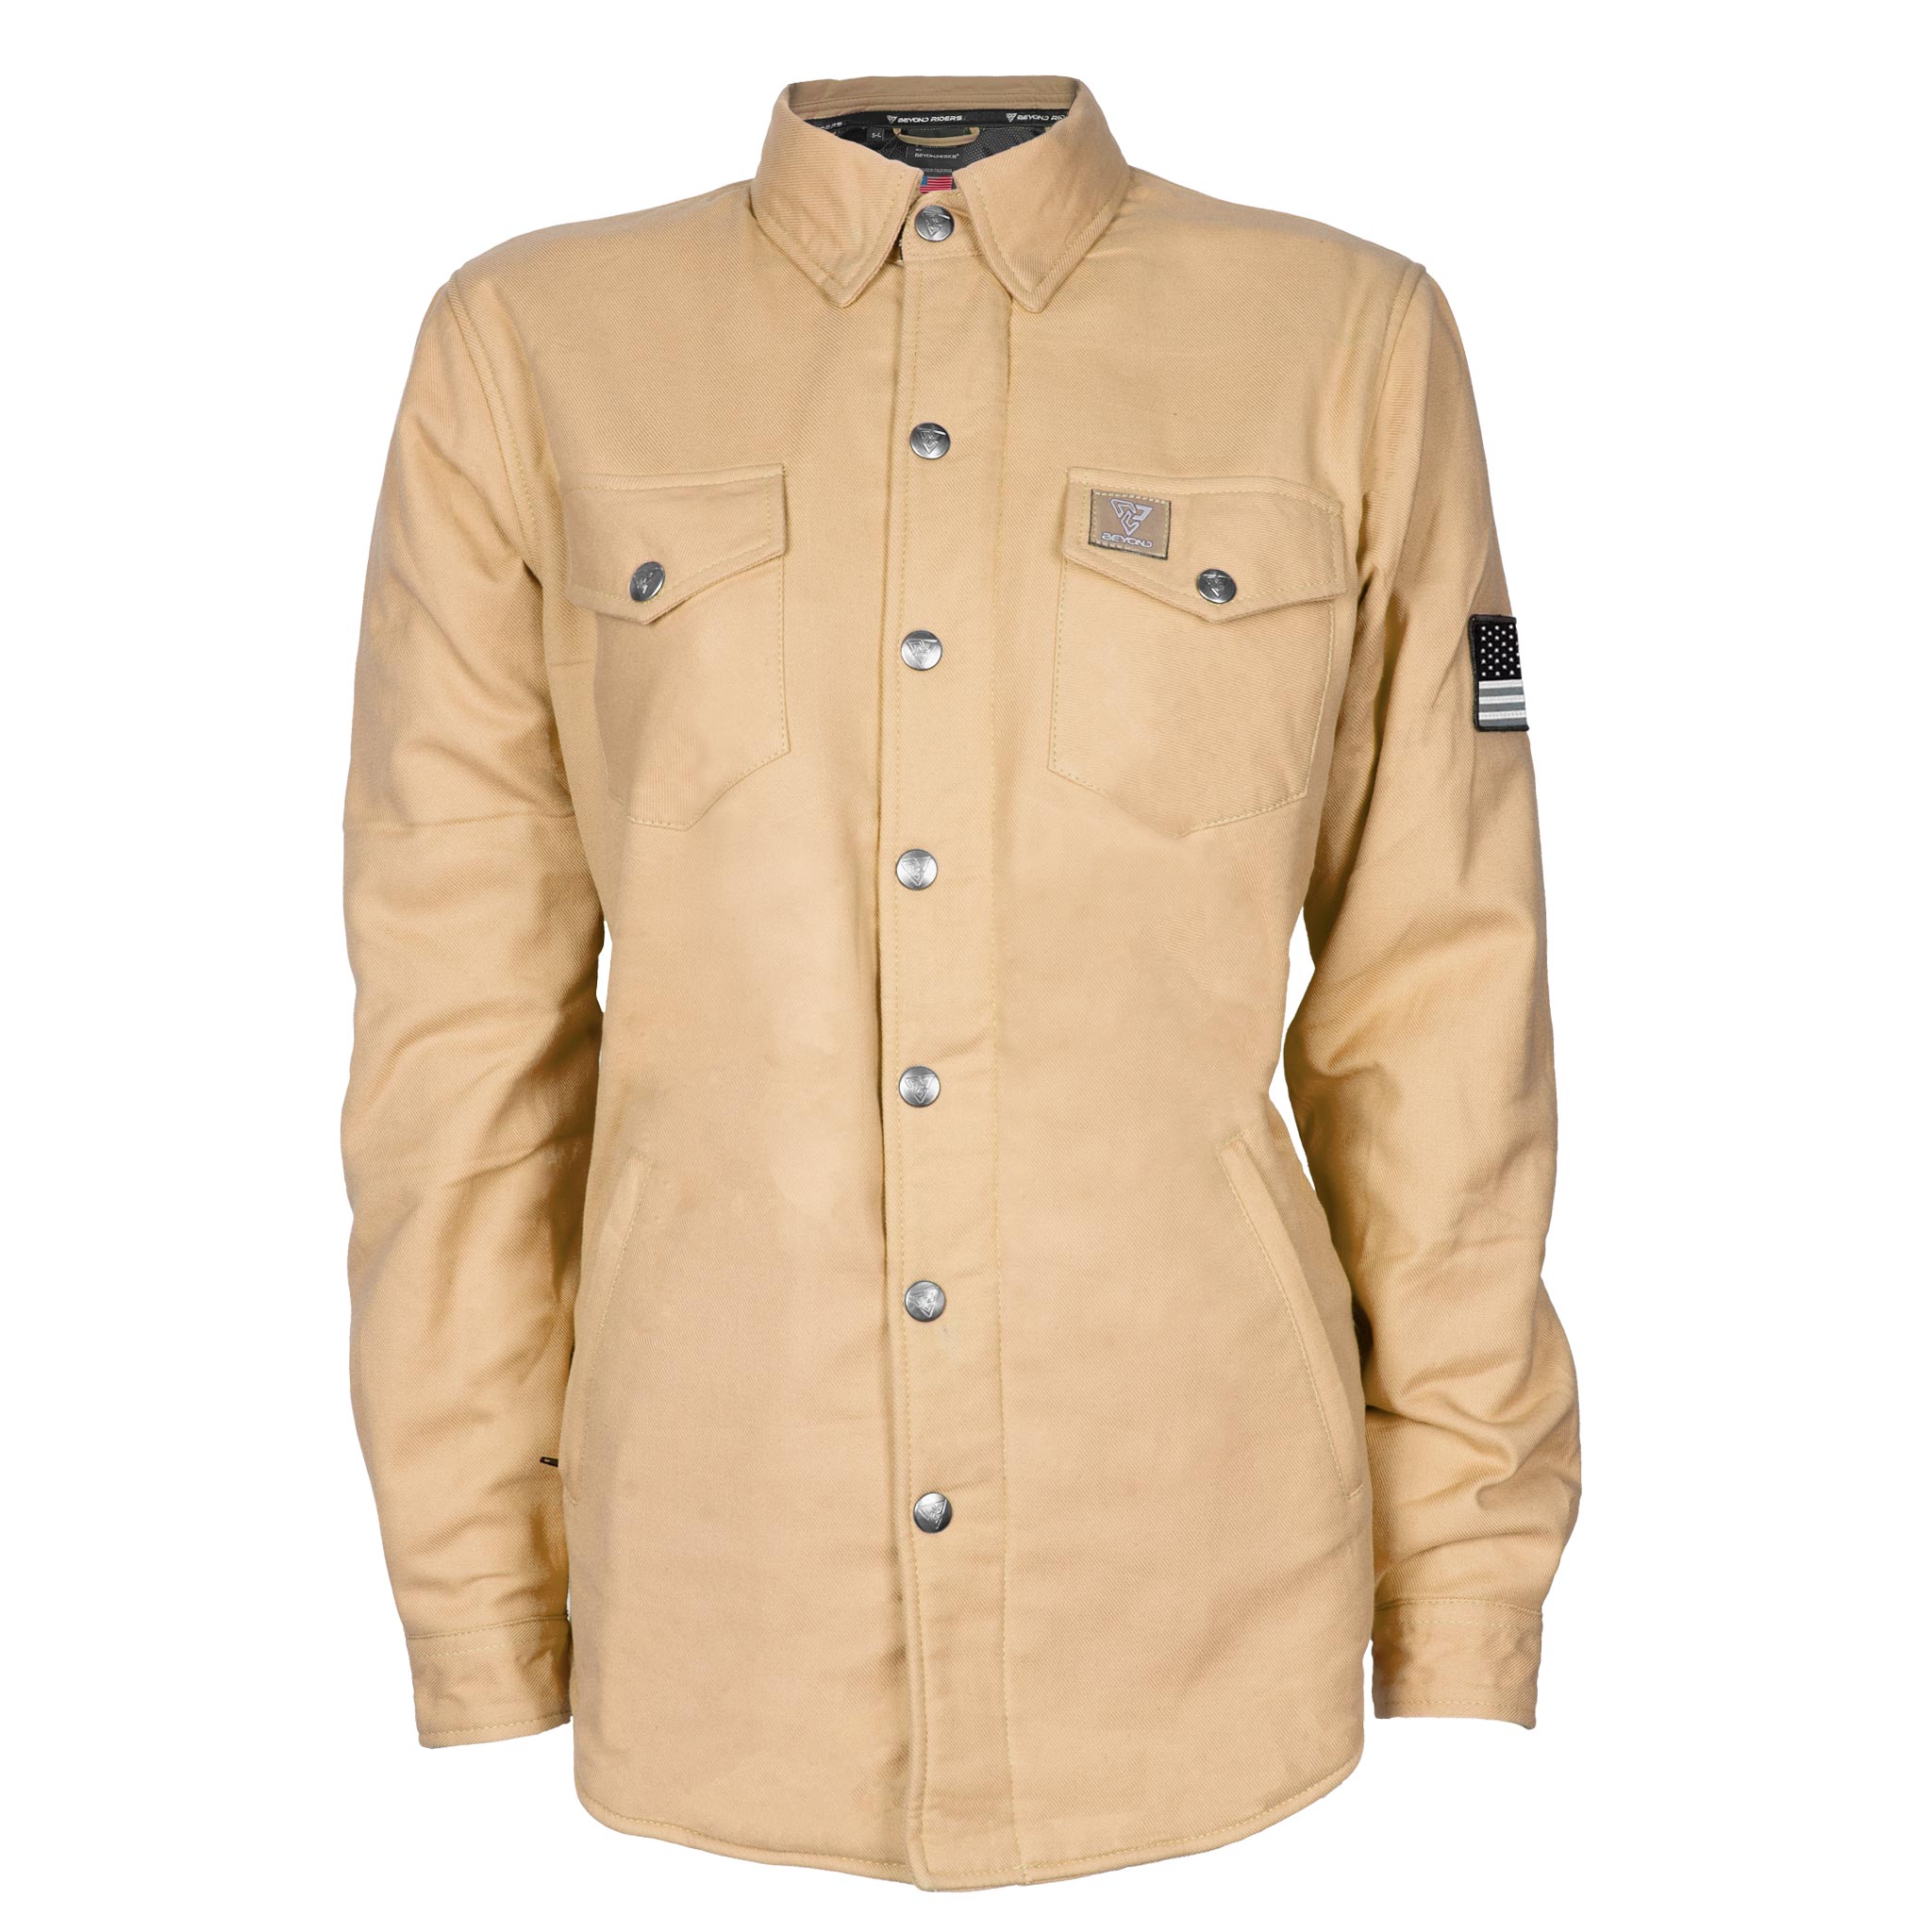 Protective Flannel Shirt for Women - Khaki Solid